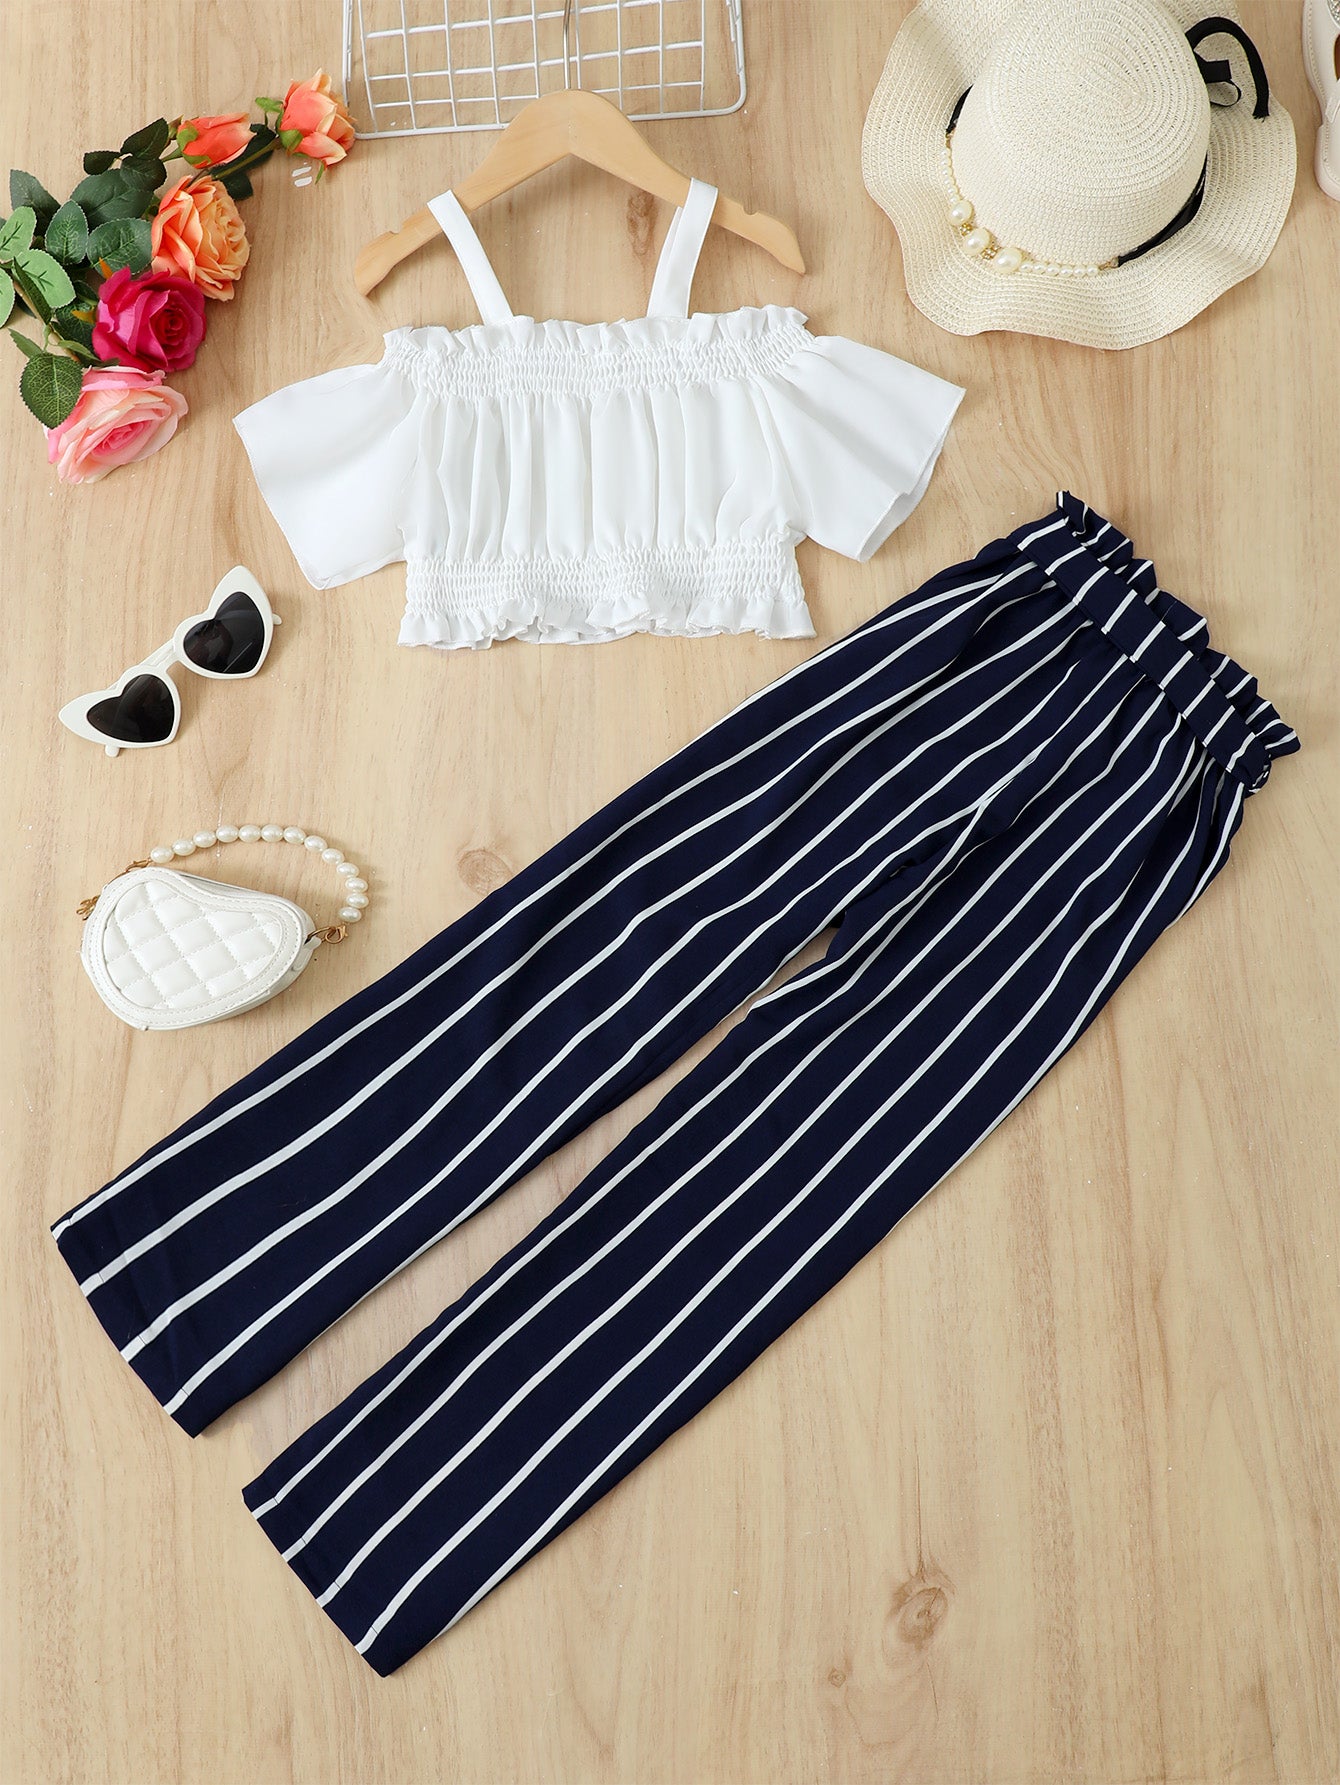 Children’s Girls Frill Trim Cropped Top and Striped Pants Set